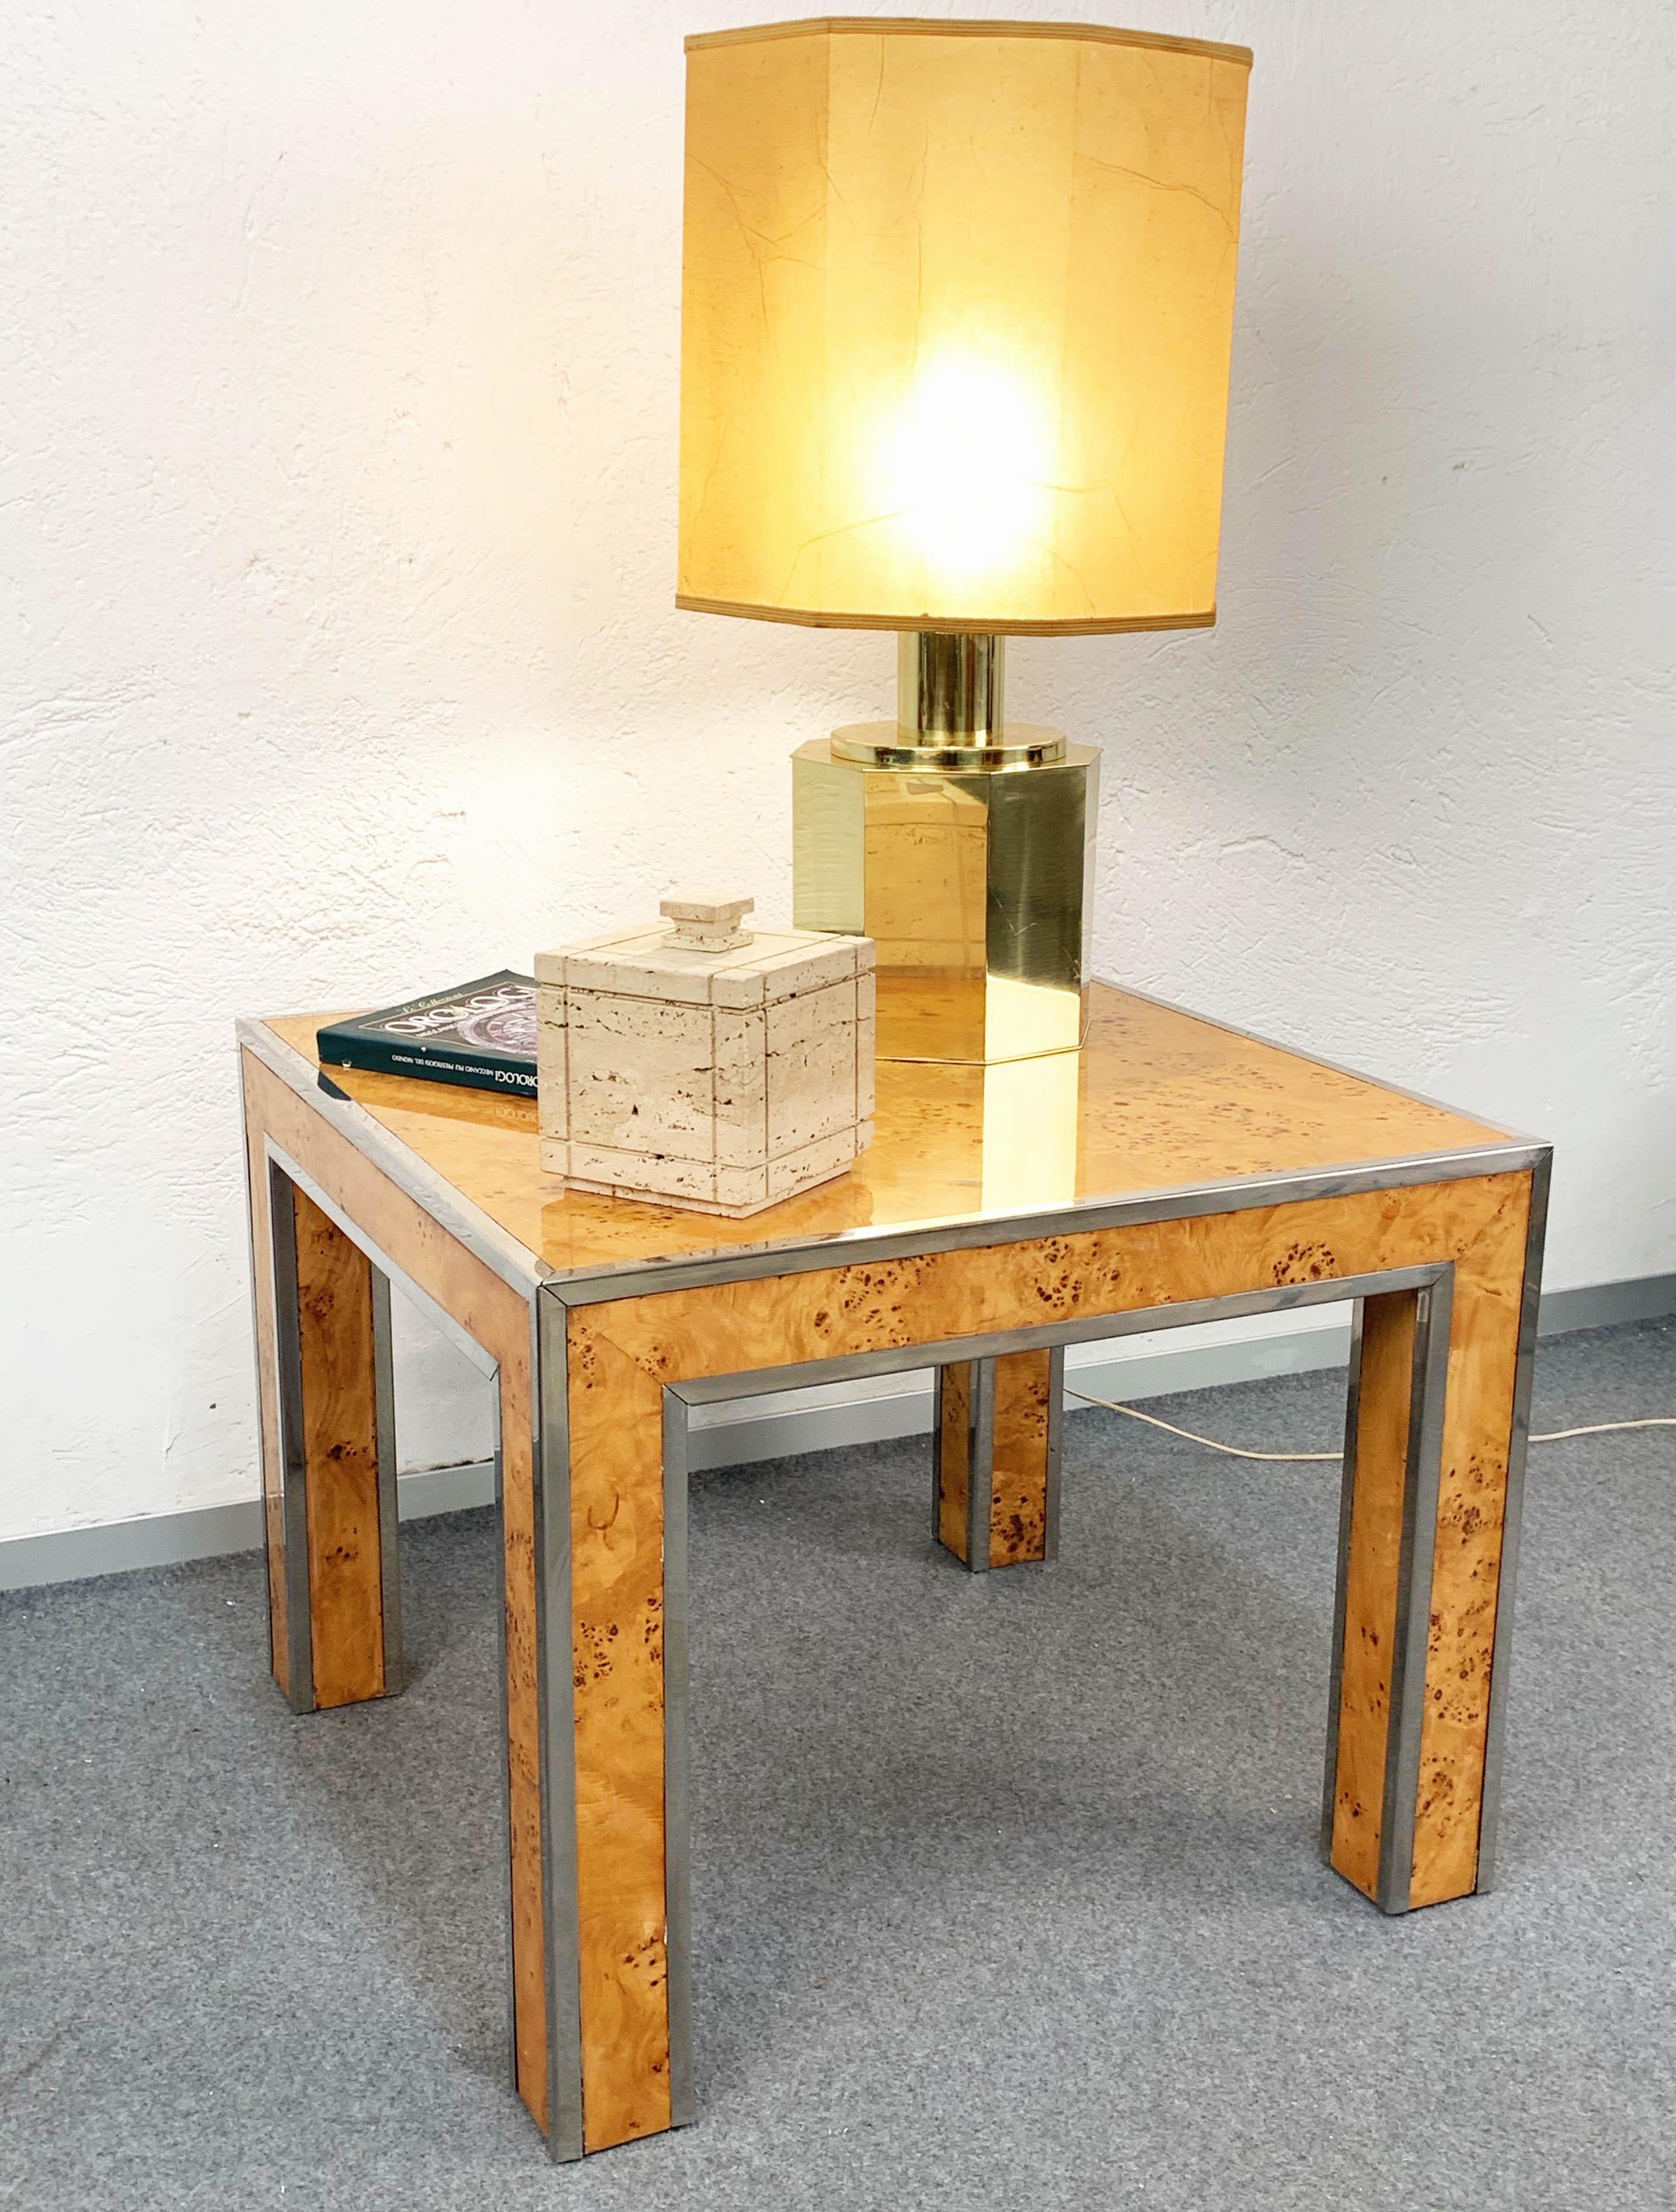 Square Briarwood and Metal Italian Coffee Table in Willy Rizzo Style, 1970s For Sale 10